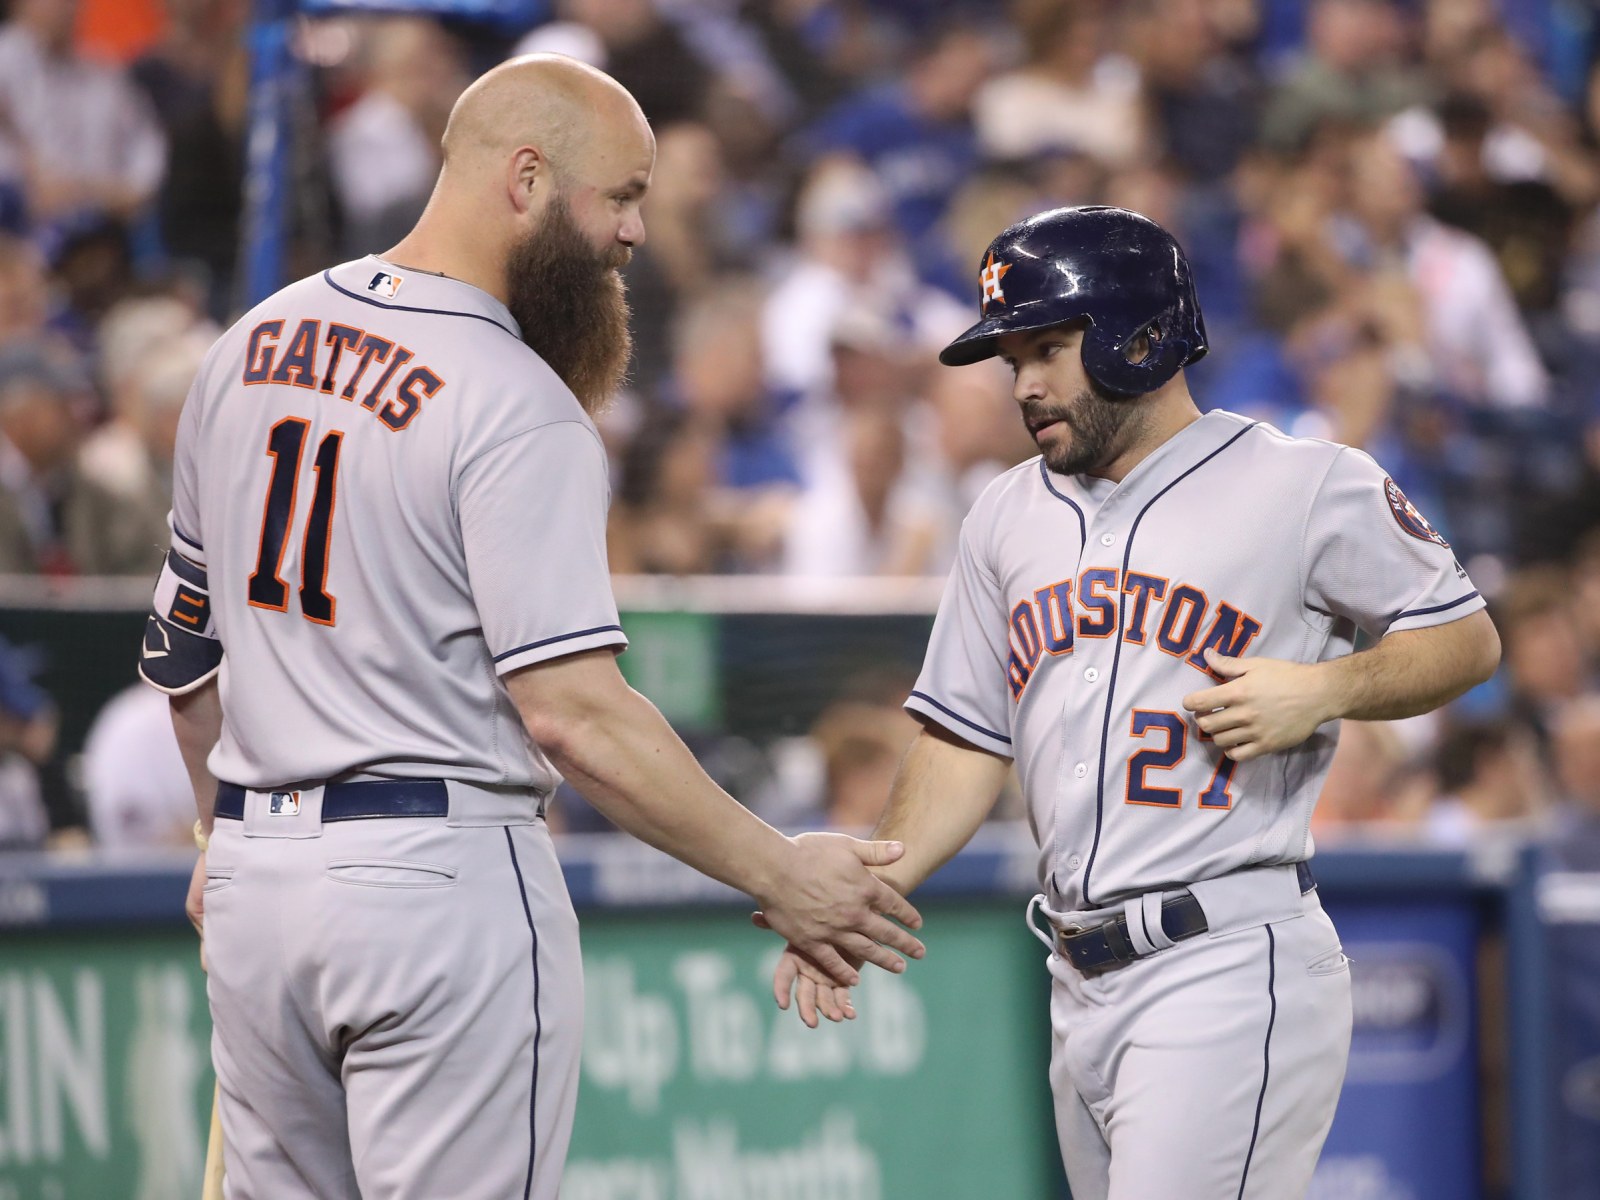 Evan Gattis on Astros sign stealing, cheating: 'People feel duped' - Sports  Illustrated